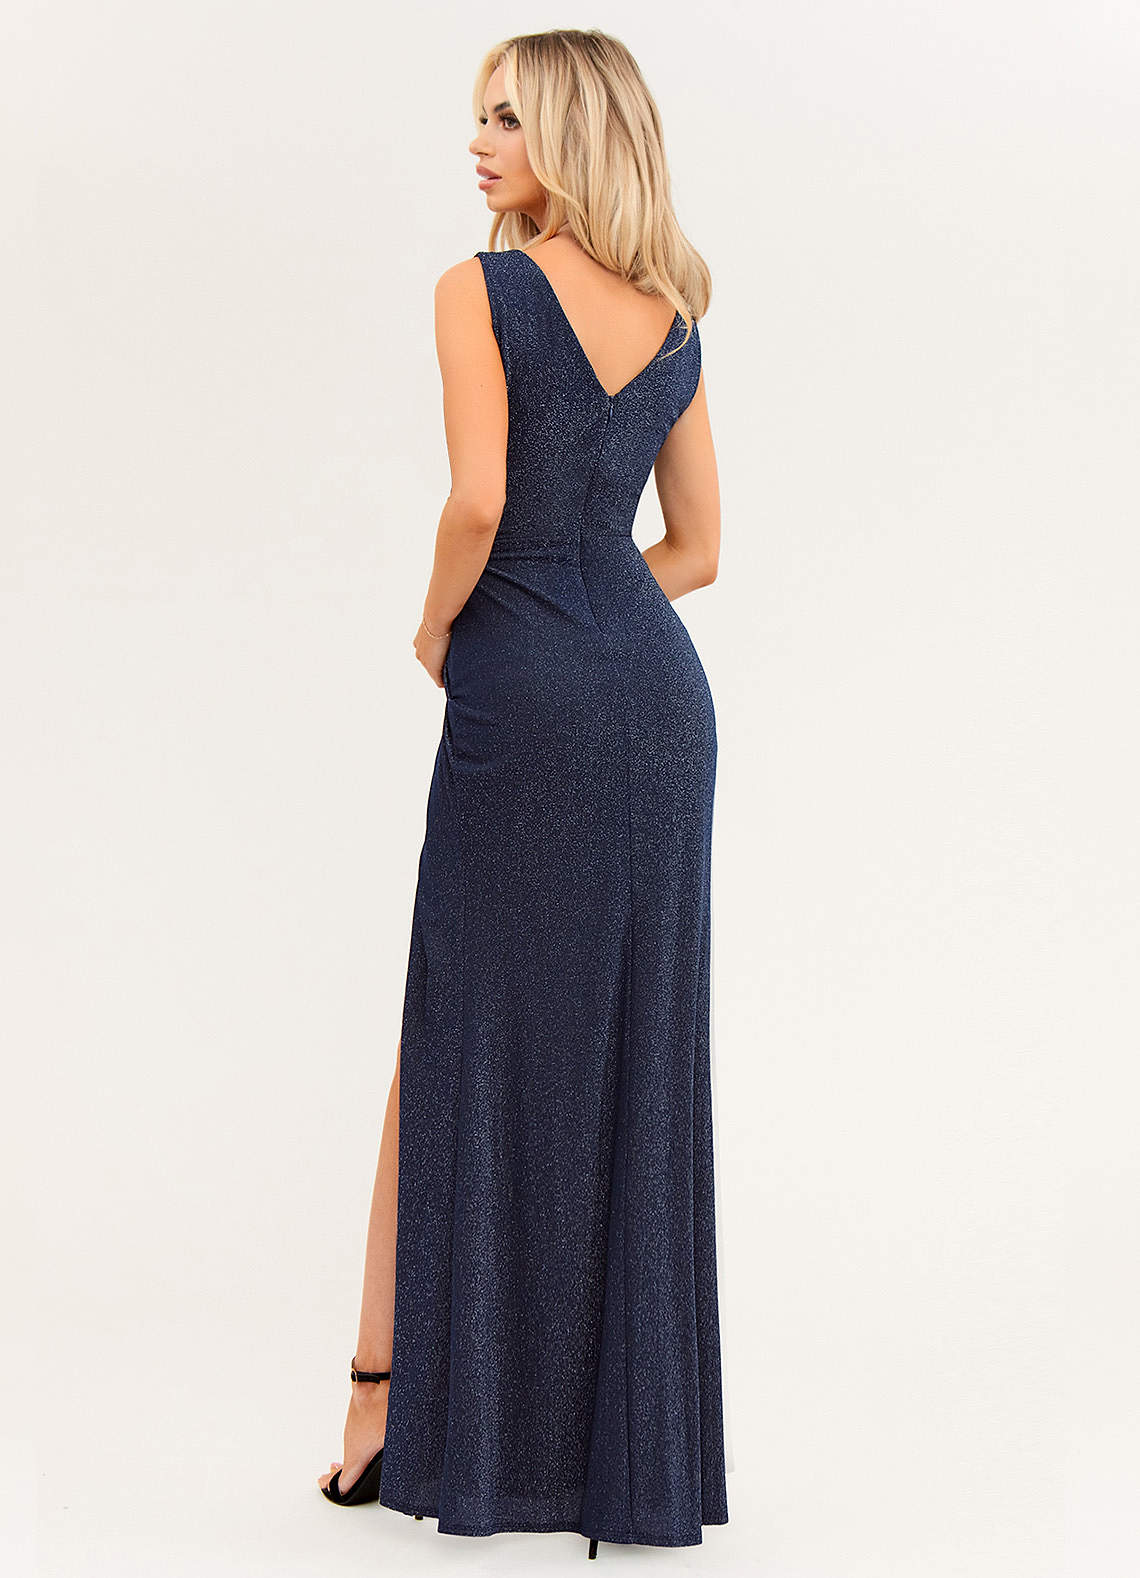 Dreaming About You Navy Blue Sparkly Maxi Dress image1